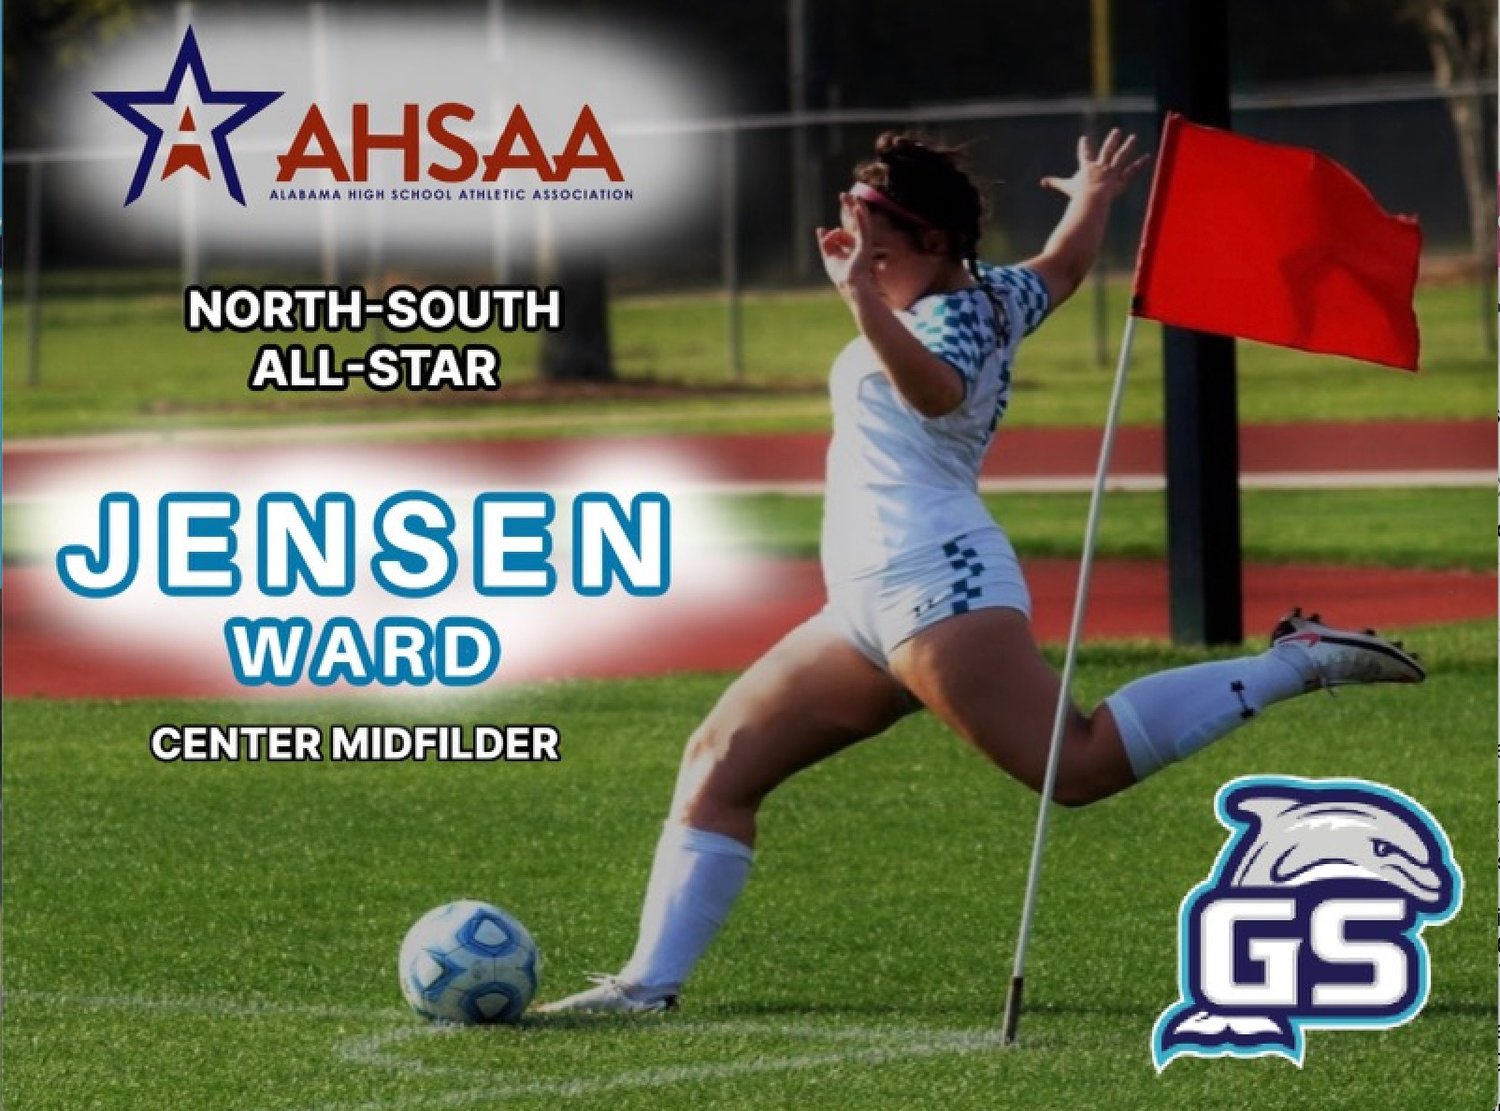 Gulf Shores’ Jensen Ward will represent the Dolphins at the 2022 AHSAA North-South All-Star Sports Week July 18-22 alongside five other local soccer players.